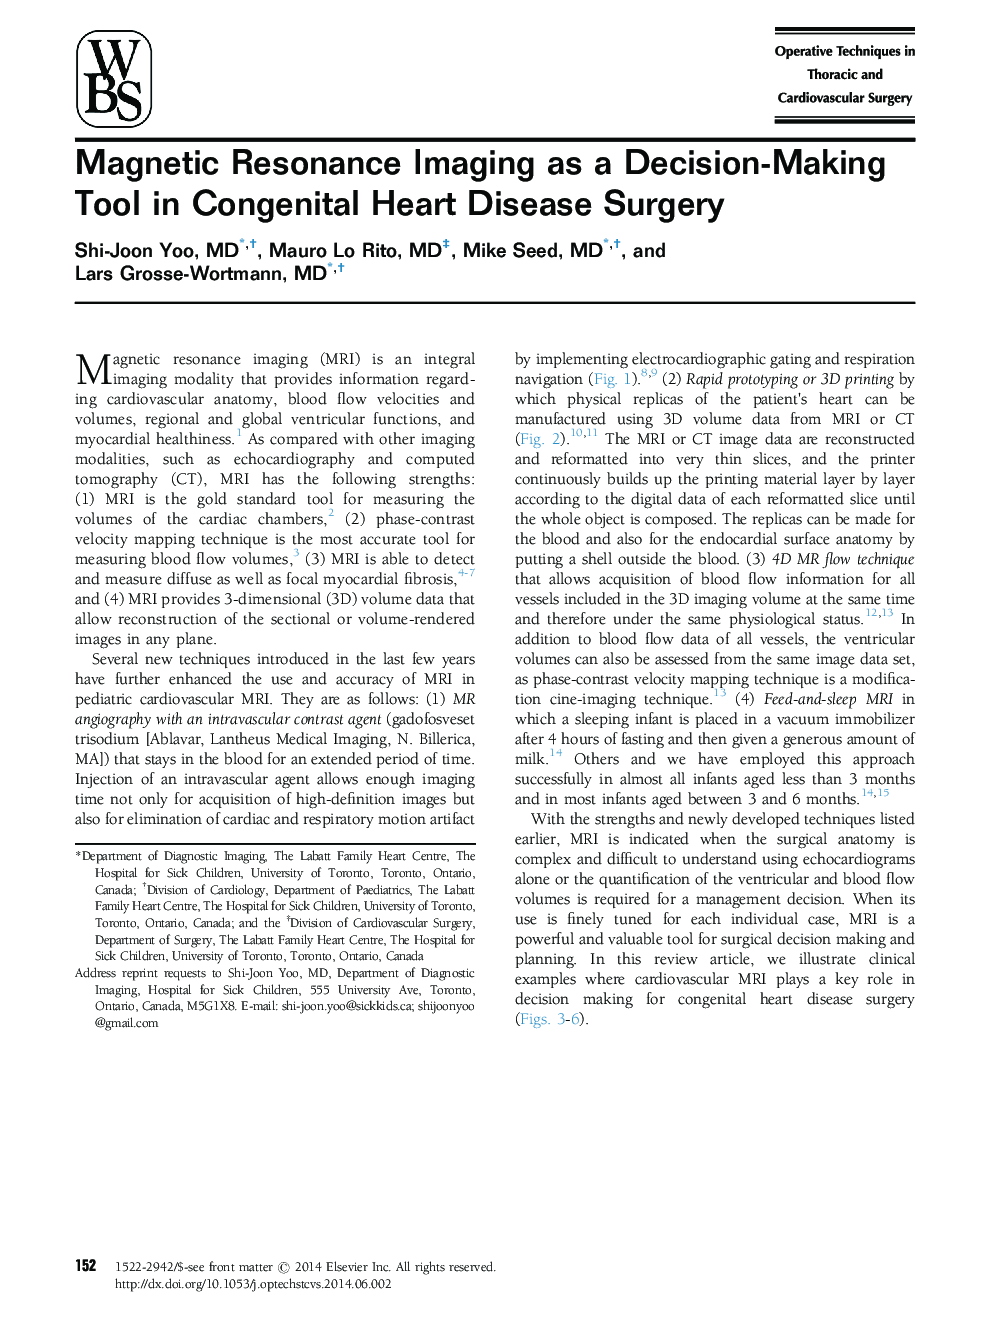 Magnetic Resonance Imaging as a Decision-Making Tool in Congenital Heart Disease Surgery